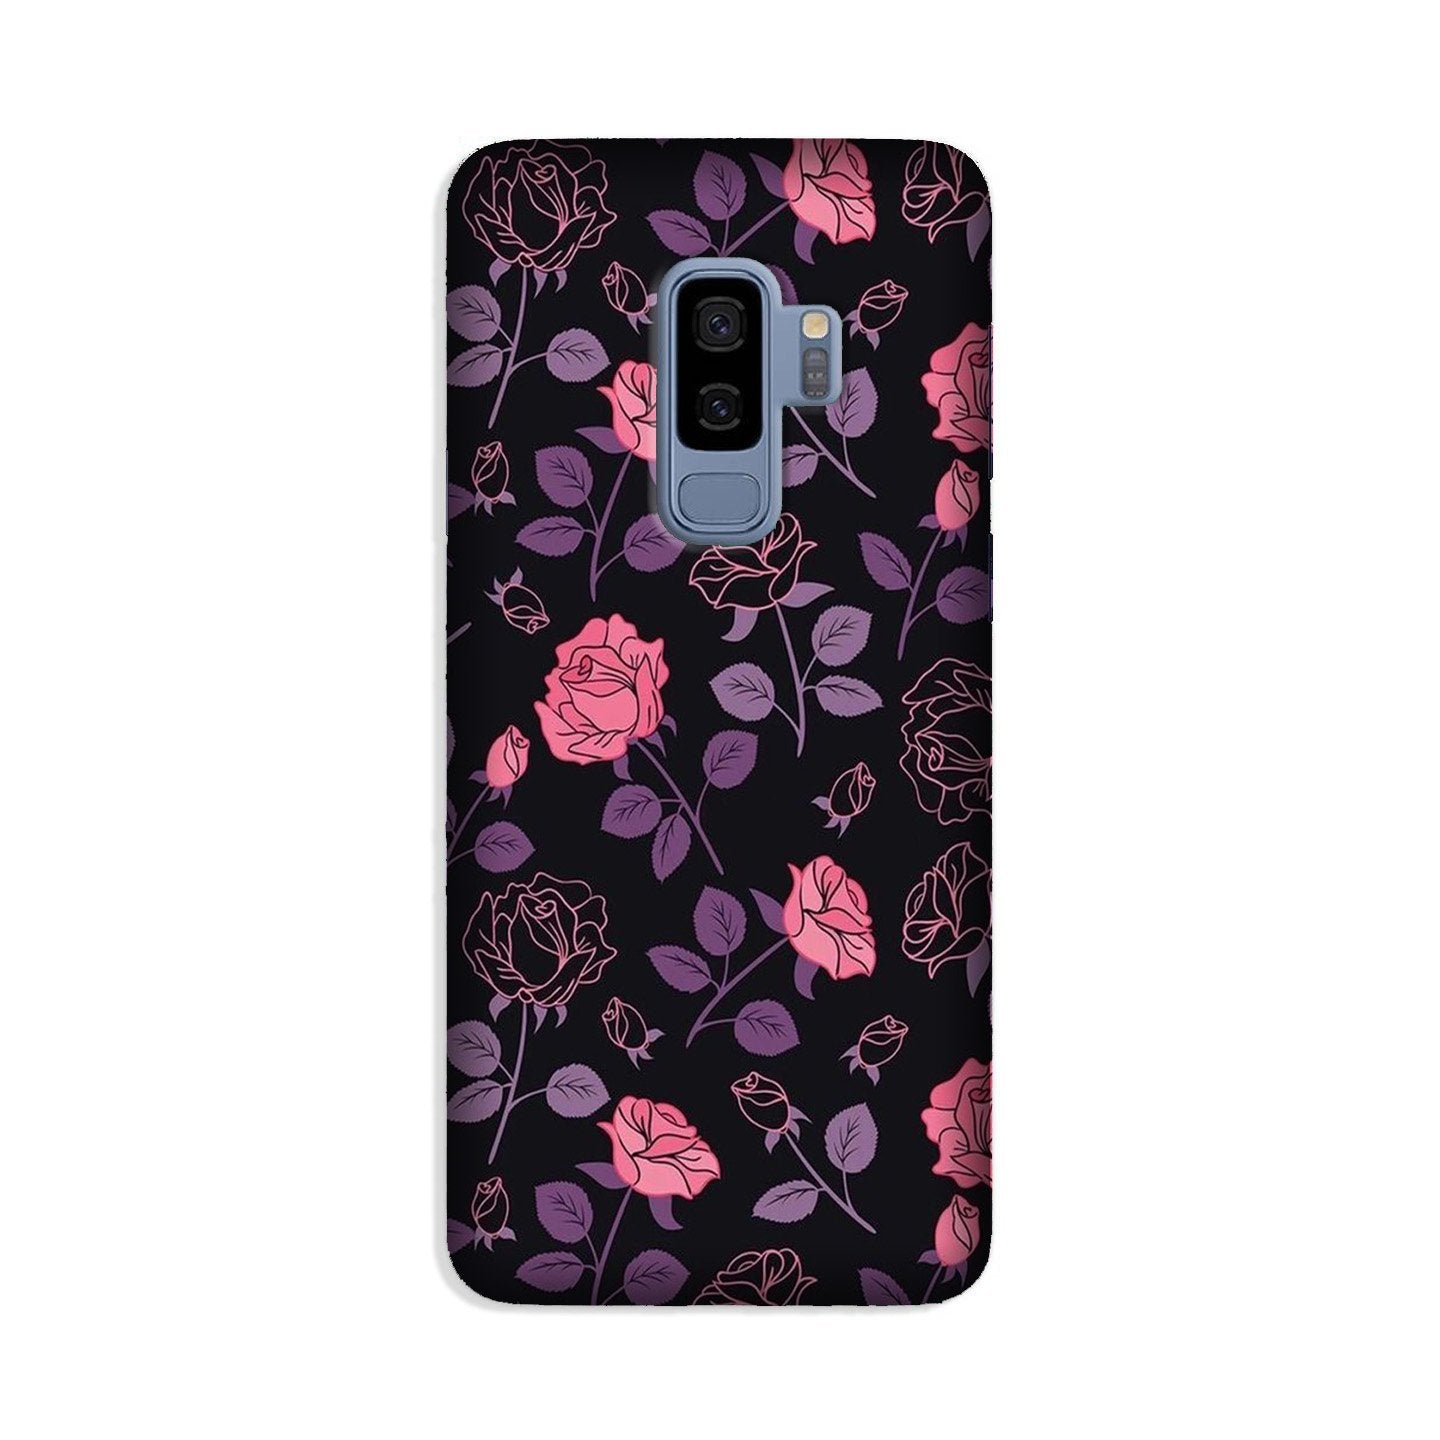 Rose Black Background Case for Galaxy S9 Plus